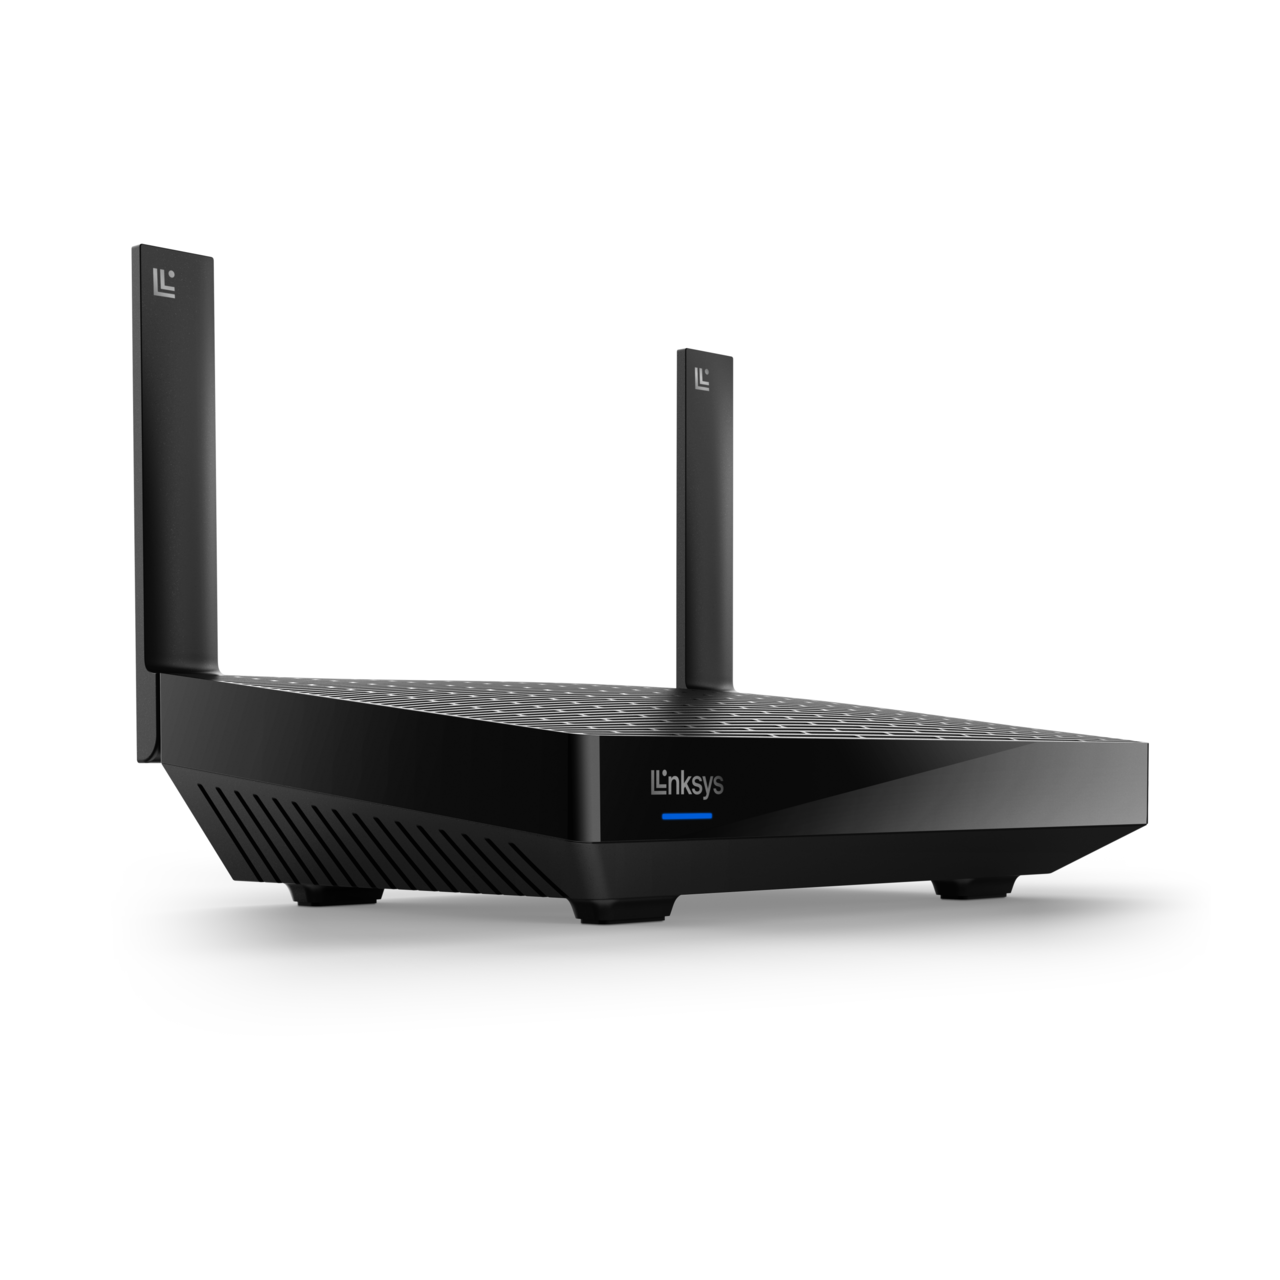 WiFi 6E Routers are Coming: Should I Replace My Current Router?